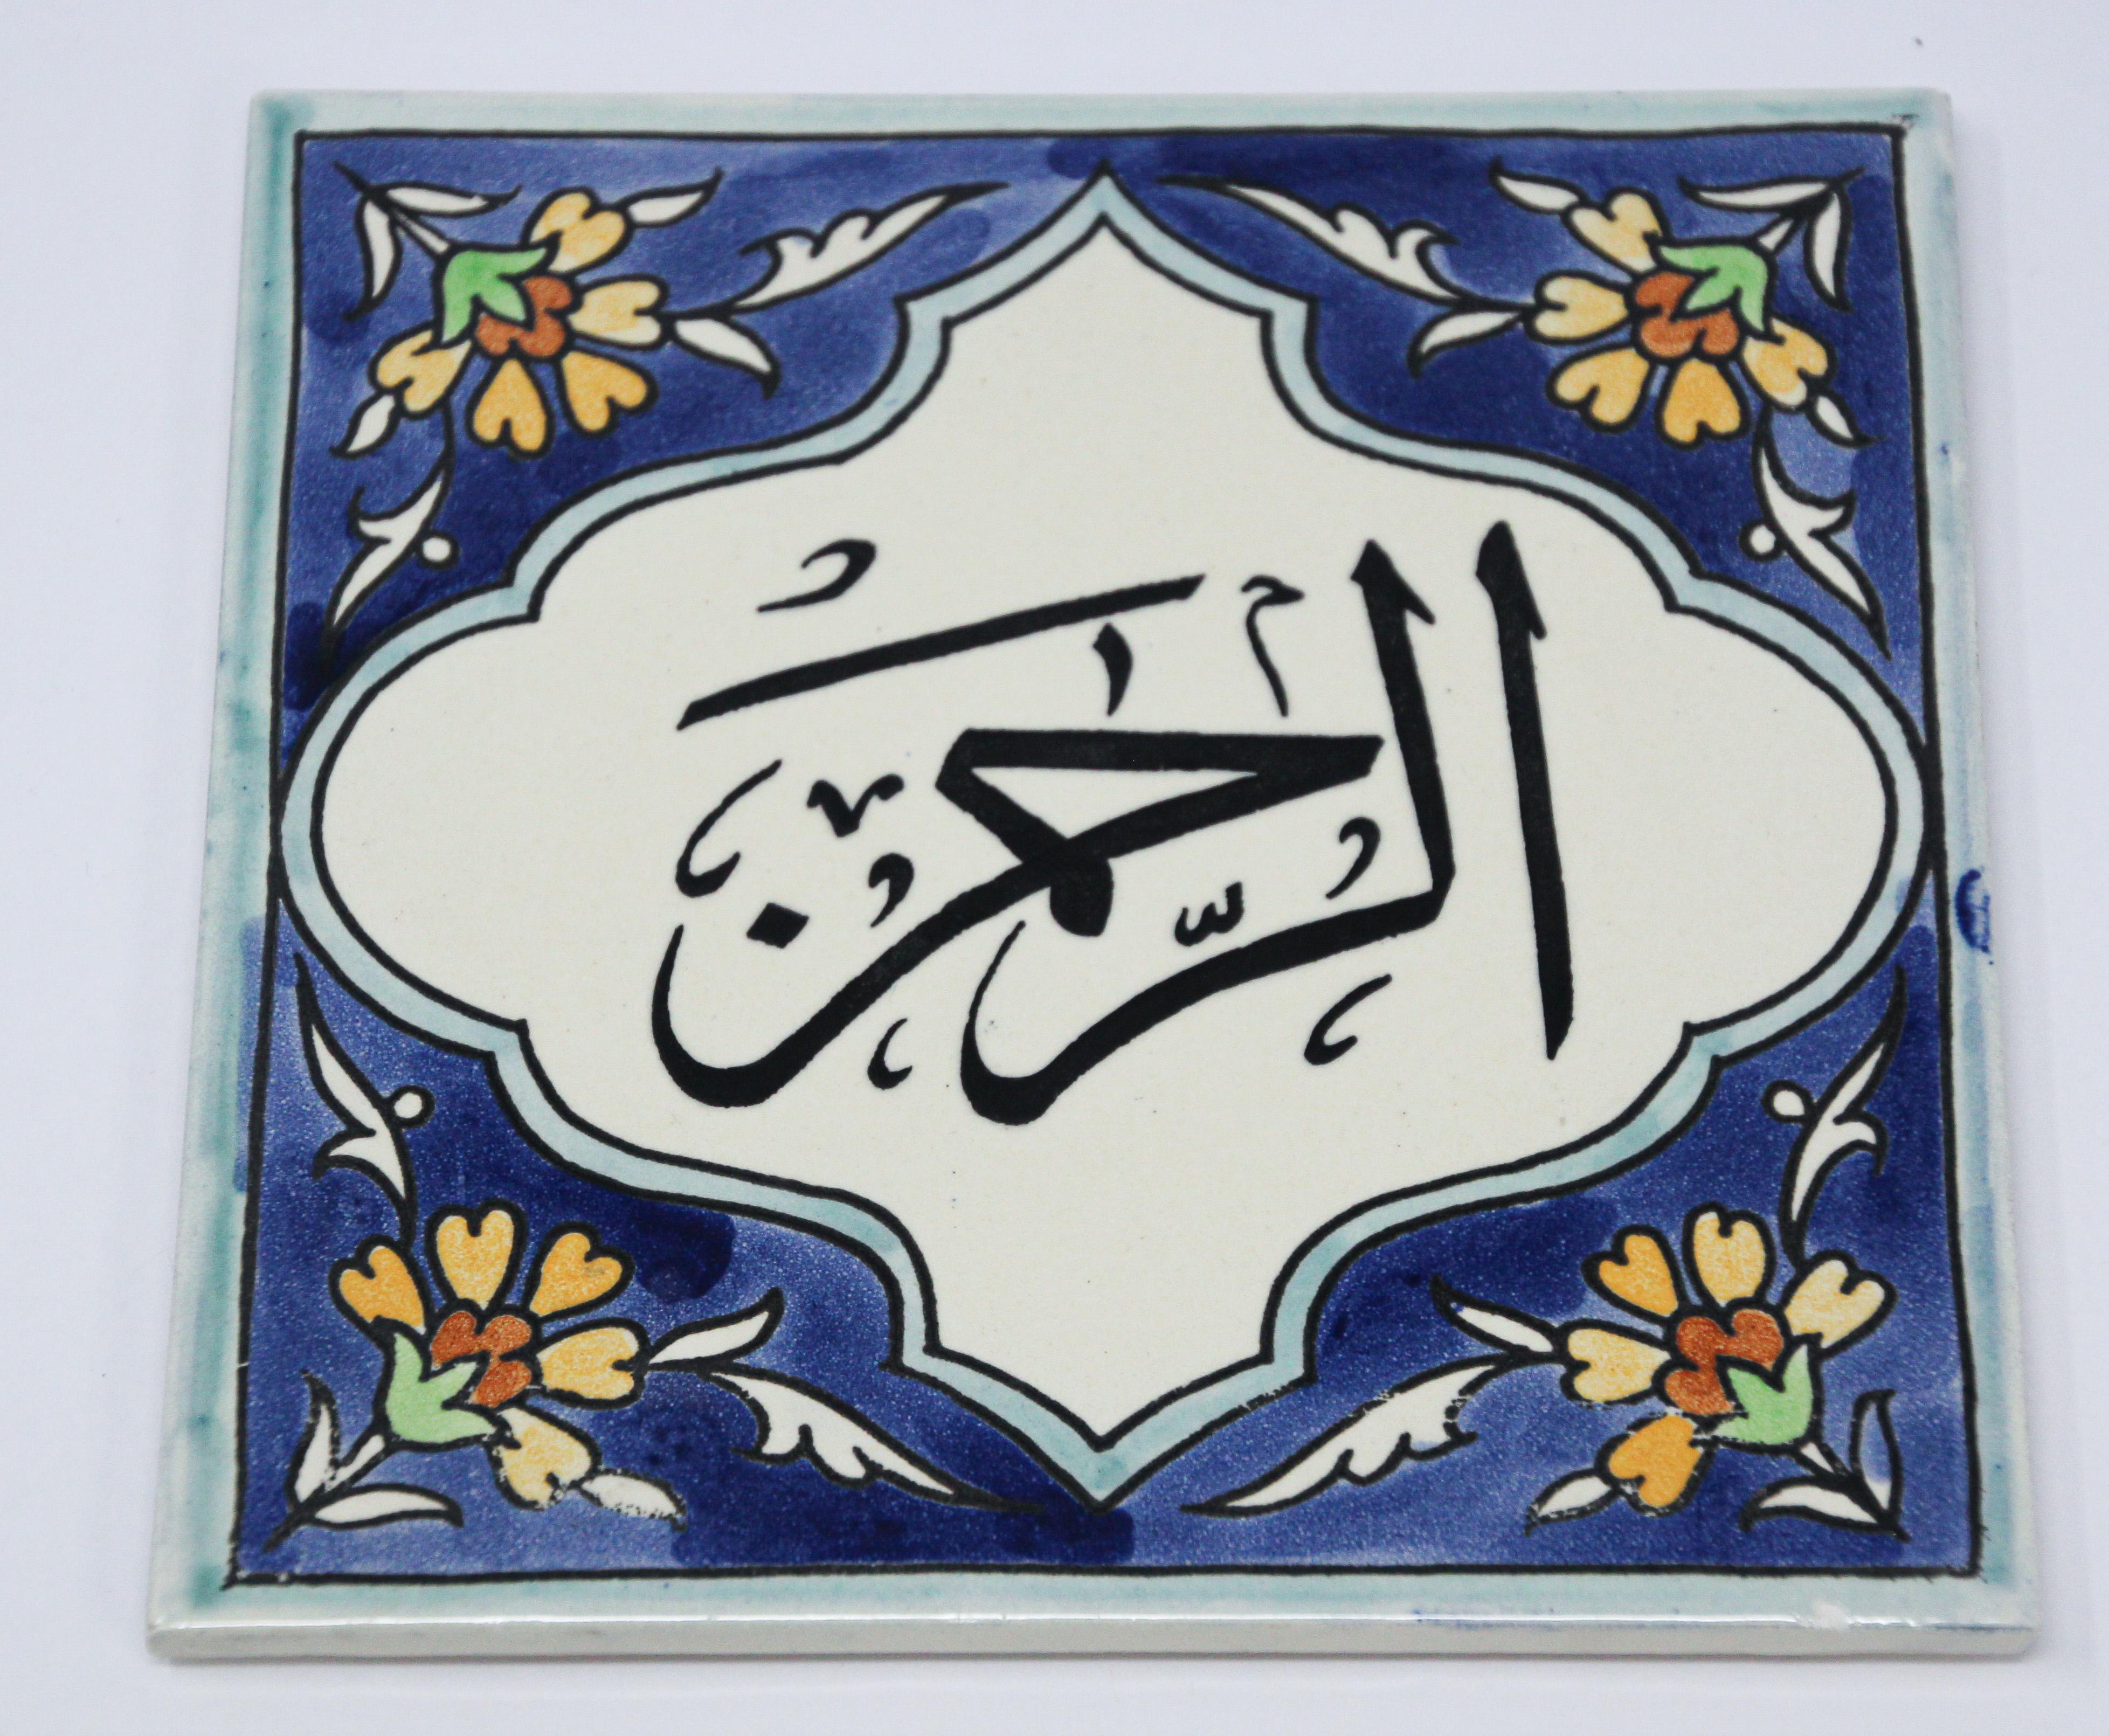 Jerusalem Pottery handcrafted decorative tile with hand painted Islamic Koranic blessing and floral design.
Ceramic Islamic tile hand painted with Arabic Islamic writing and flowers.
